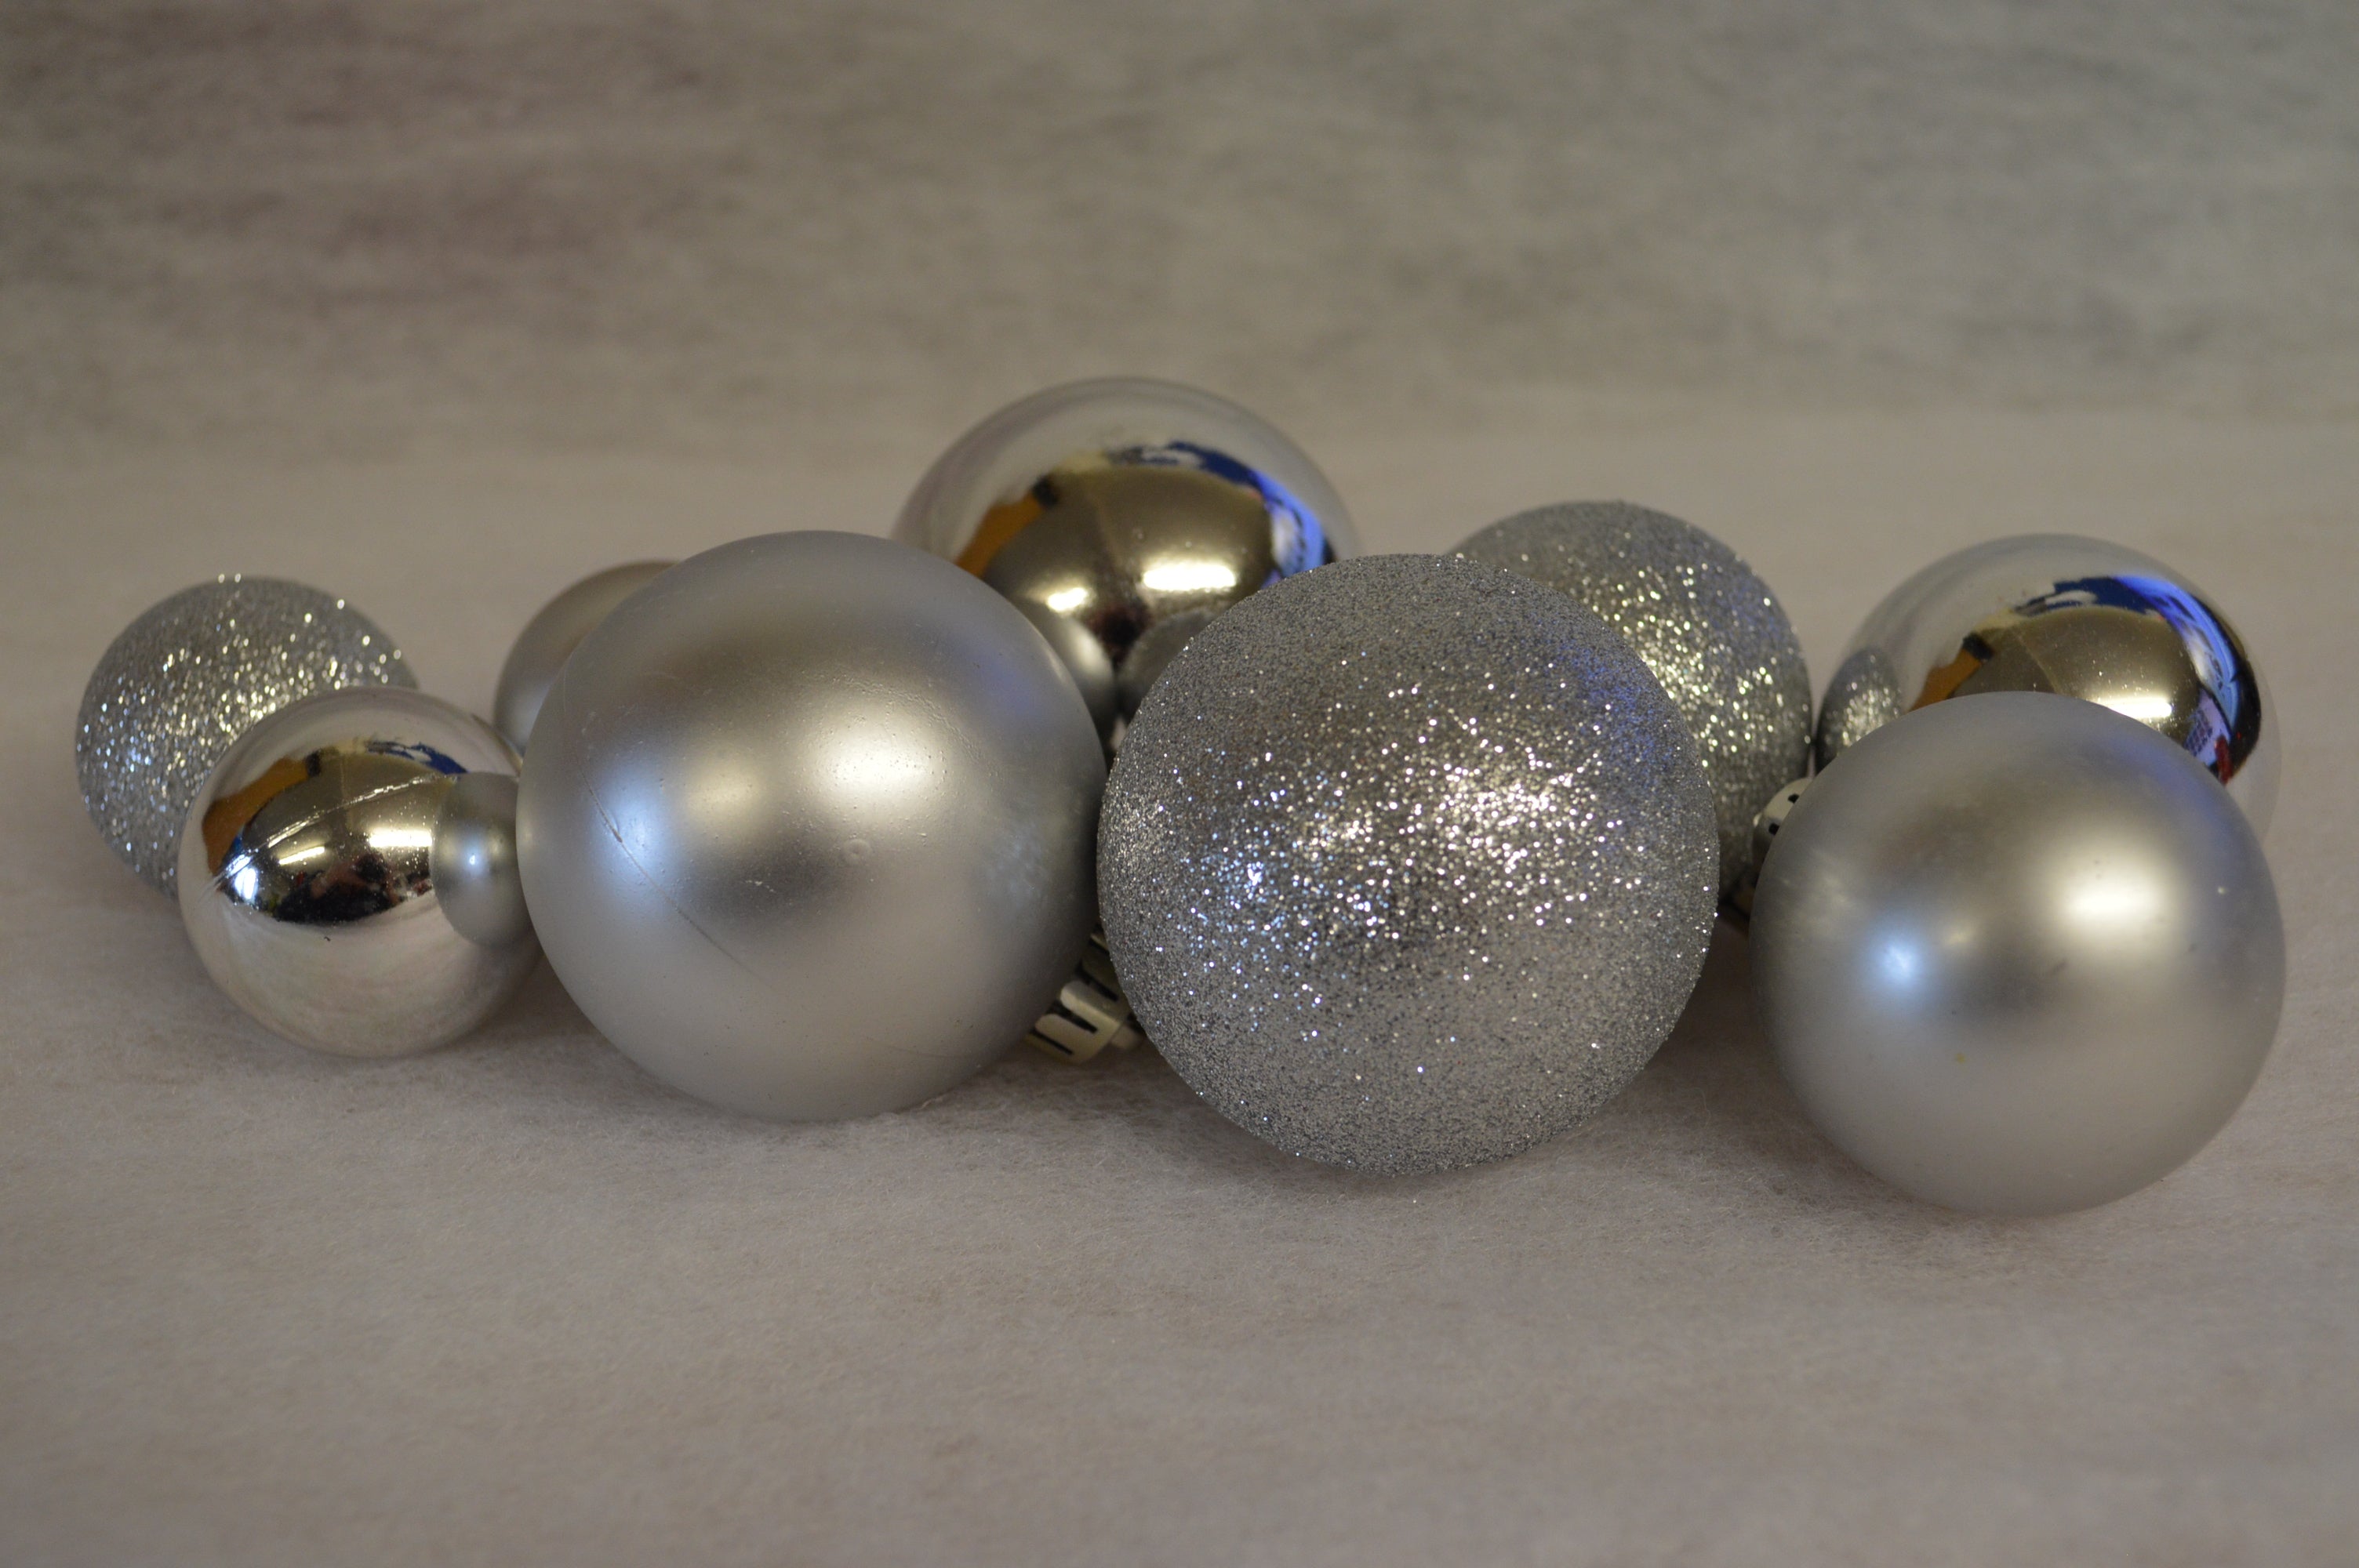 Pack of 30 Assorted Shatterproof Christmas Tree Bauble Decorations - Silver